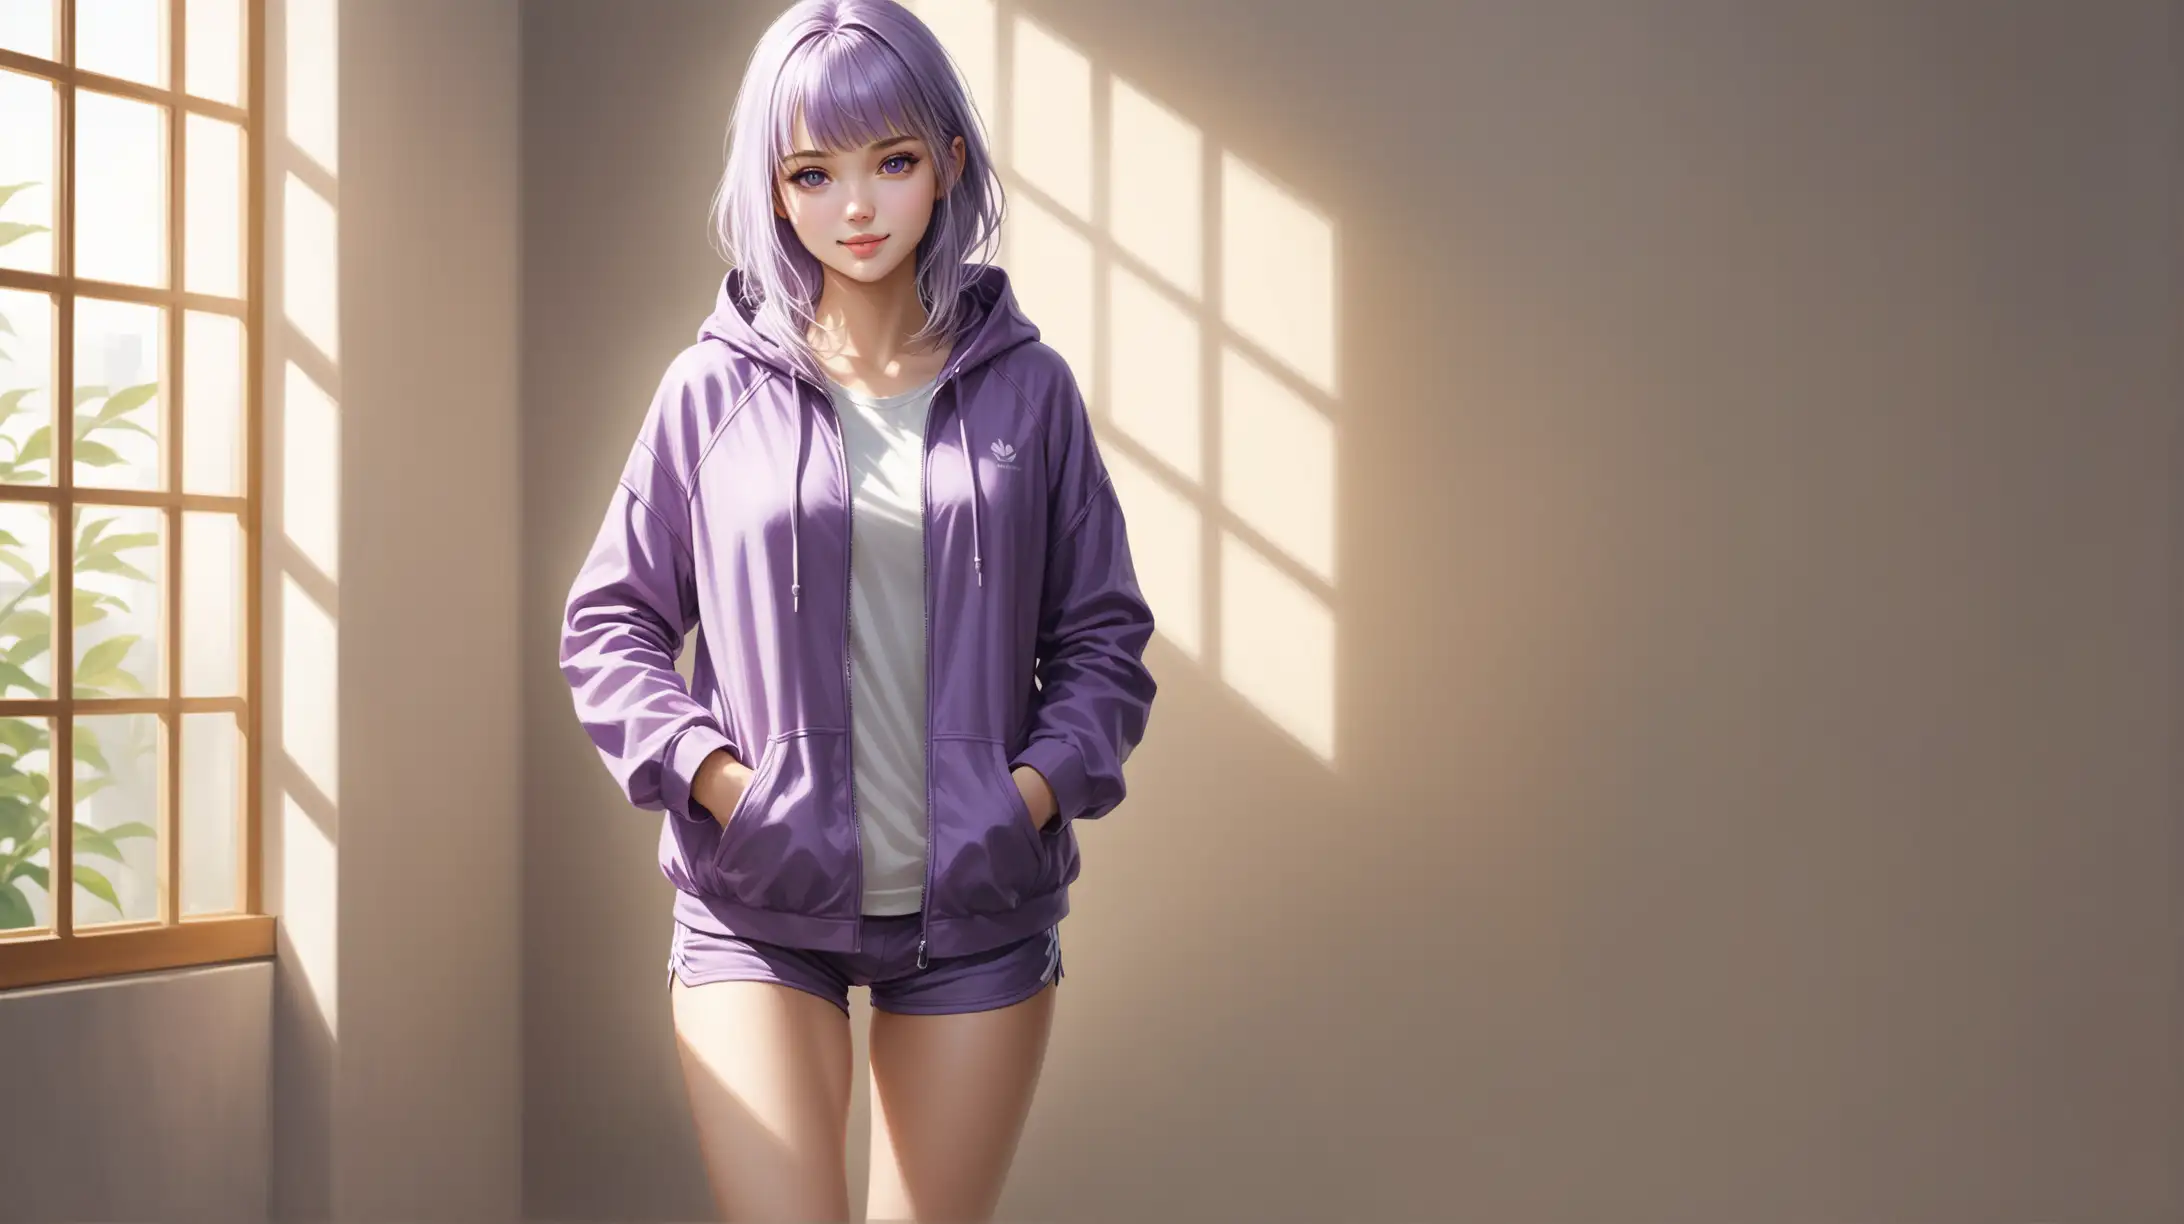 Draw a woman, shoulder length light purple hair, messy bangs framing her face, light purple eyes, petite figure, high quality, realistic, accurate, detailed, long shot, indoors, standing, full body, natural lighting, seductive pose, shorts and hooded jacket, smiling at the viewer